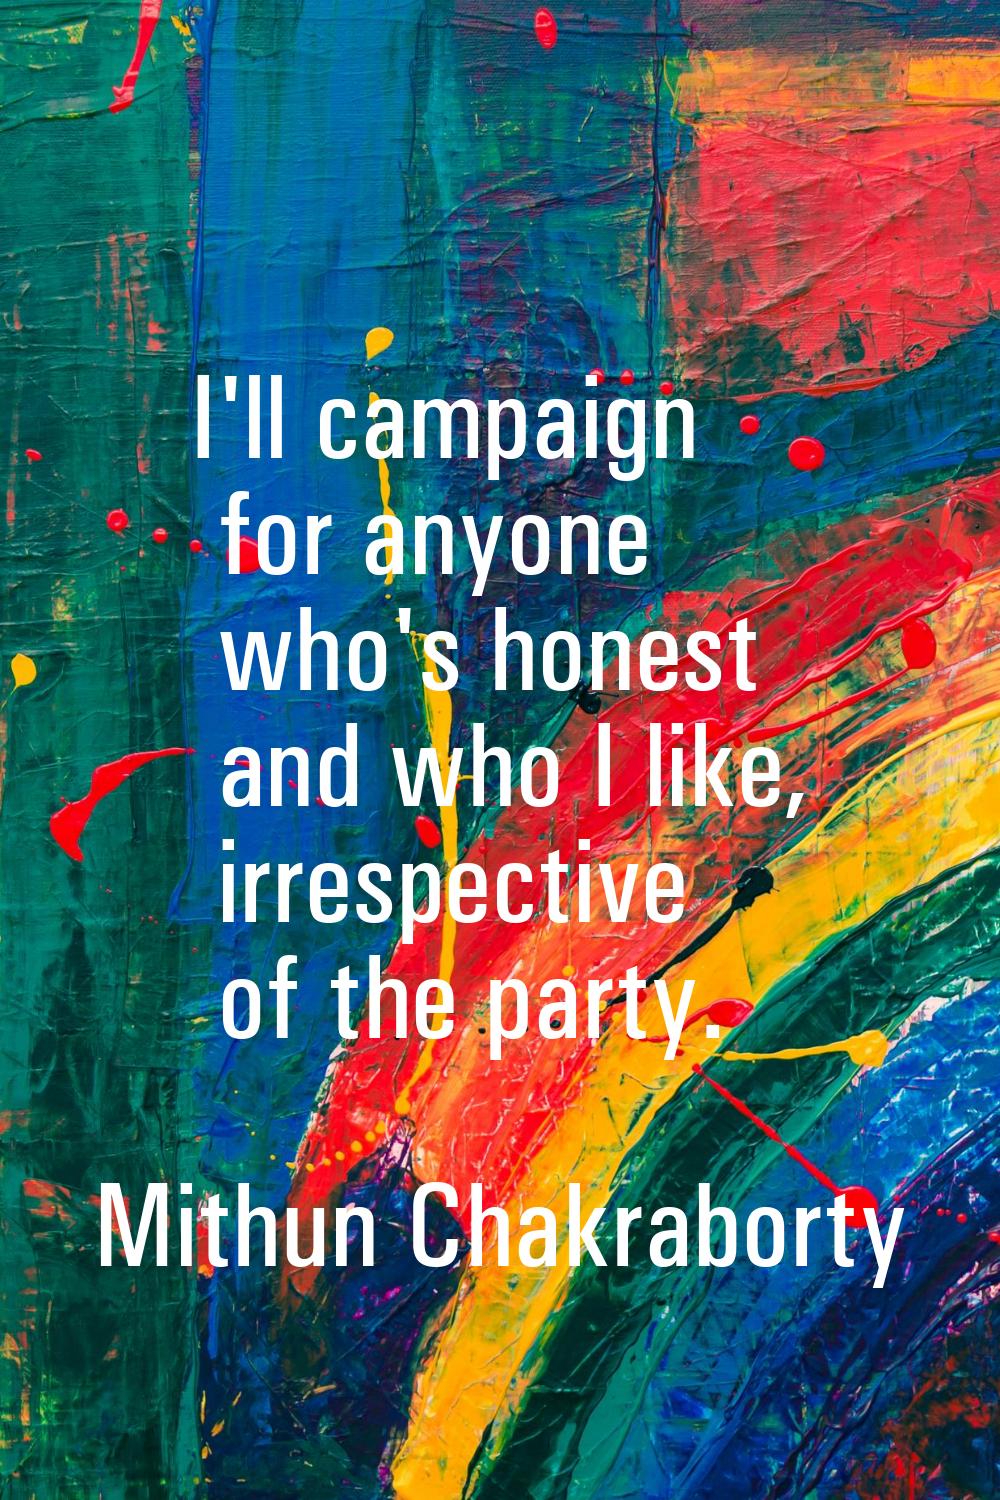 I'll campaign for anyone who's honest and who I like, irrespective of the party.